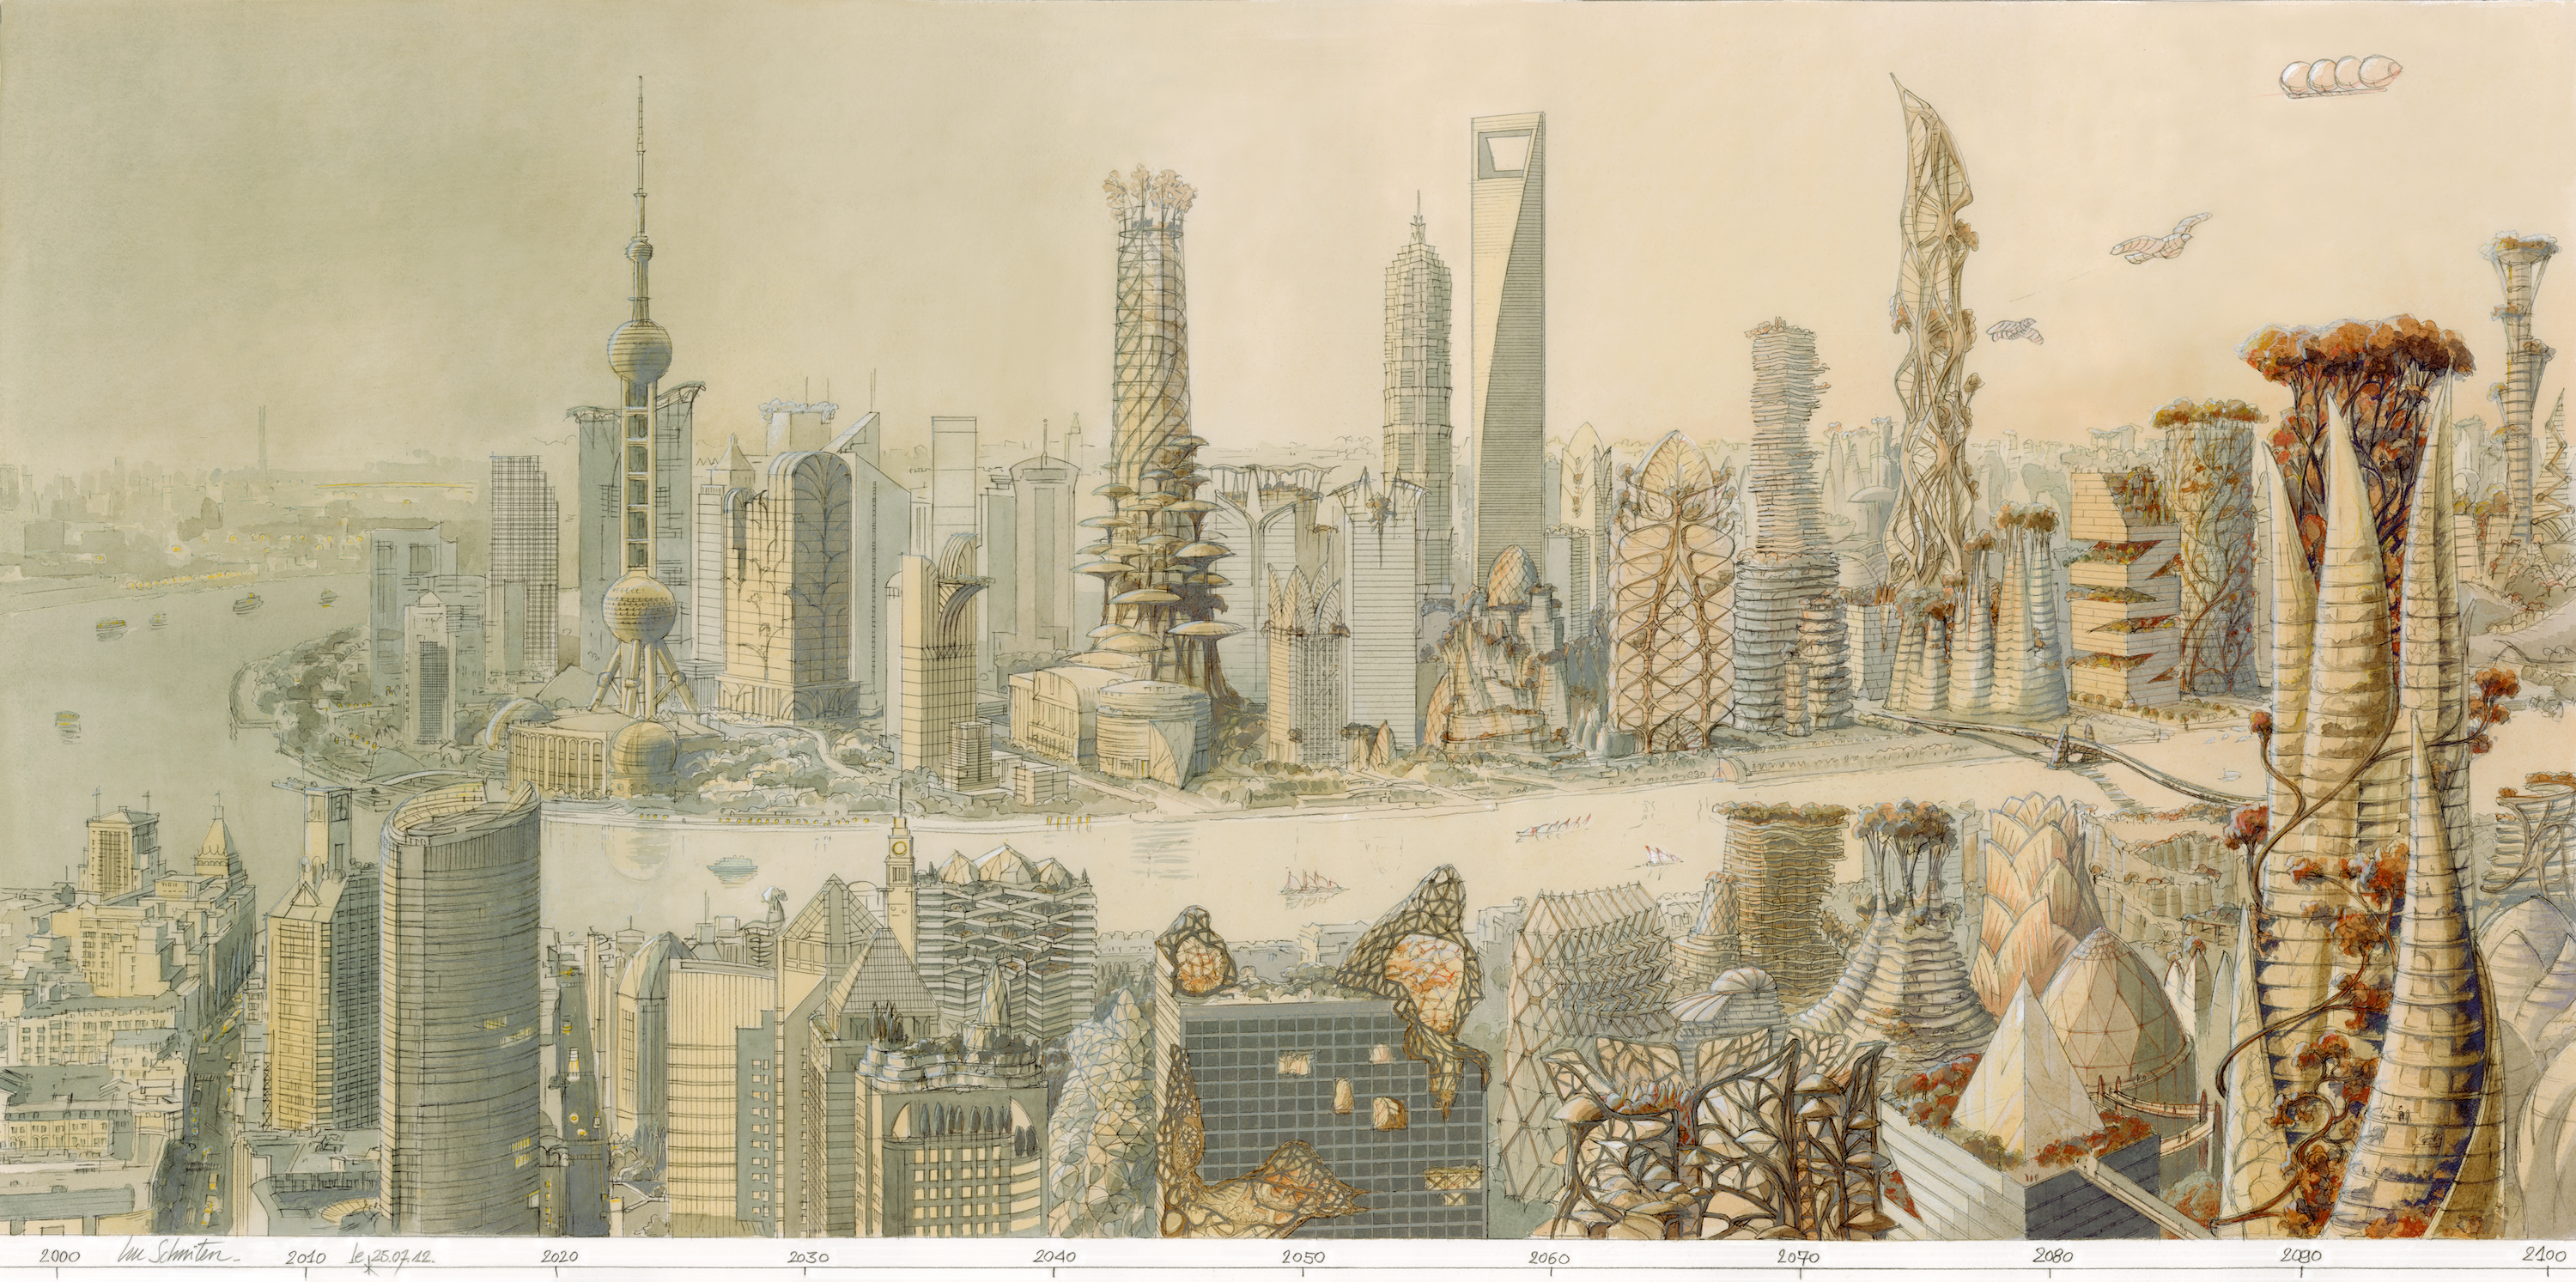 A visual timeline (left to right) of Shanghai, China, over the course of its century-long transformation into a solarpunk metropolis. Illustration by Luc Schuiten